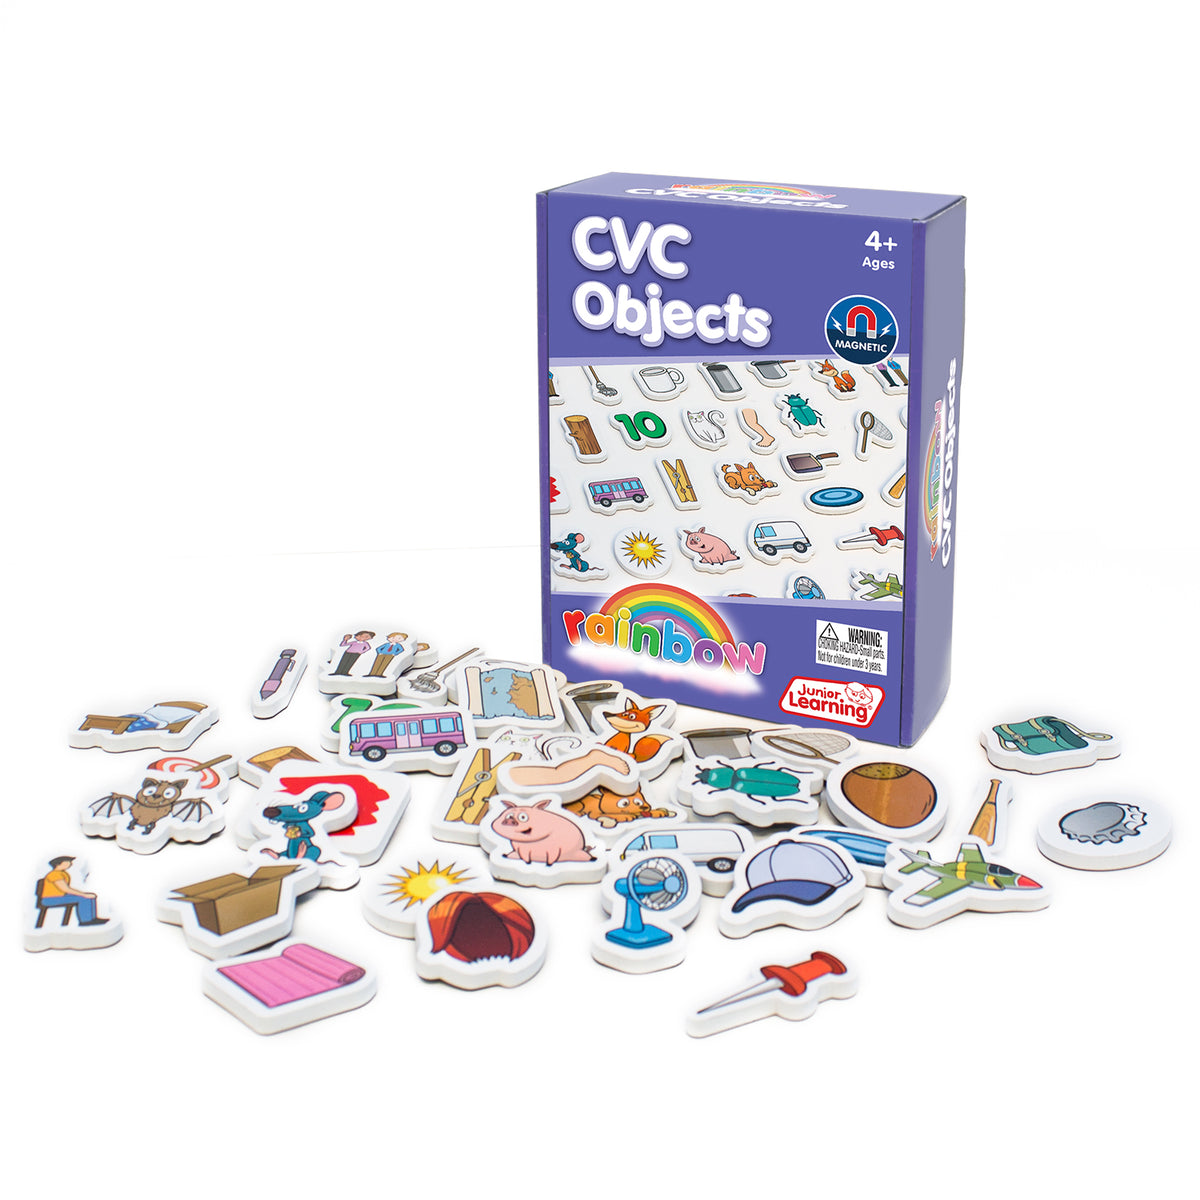 Junior Learning JL641 Rainbow CVC Objects box and pieces